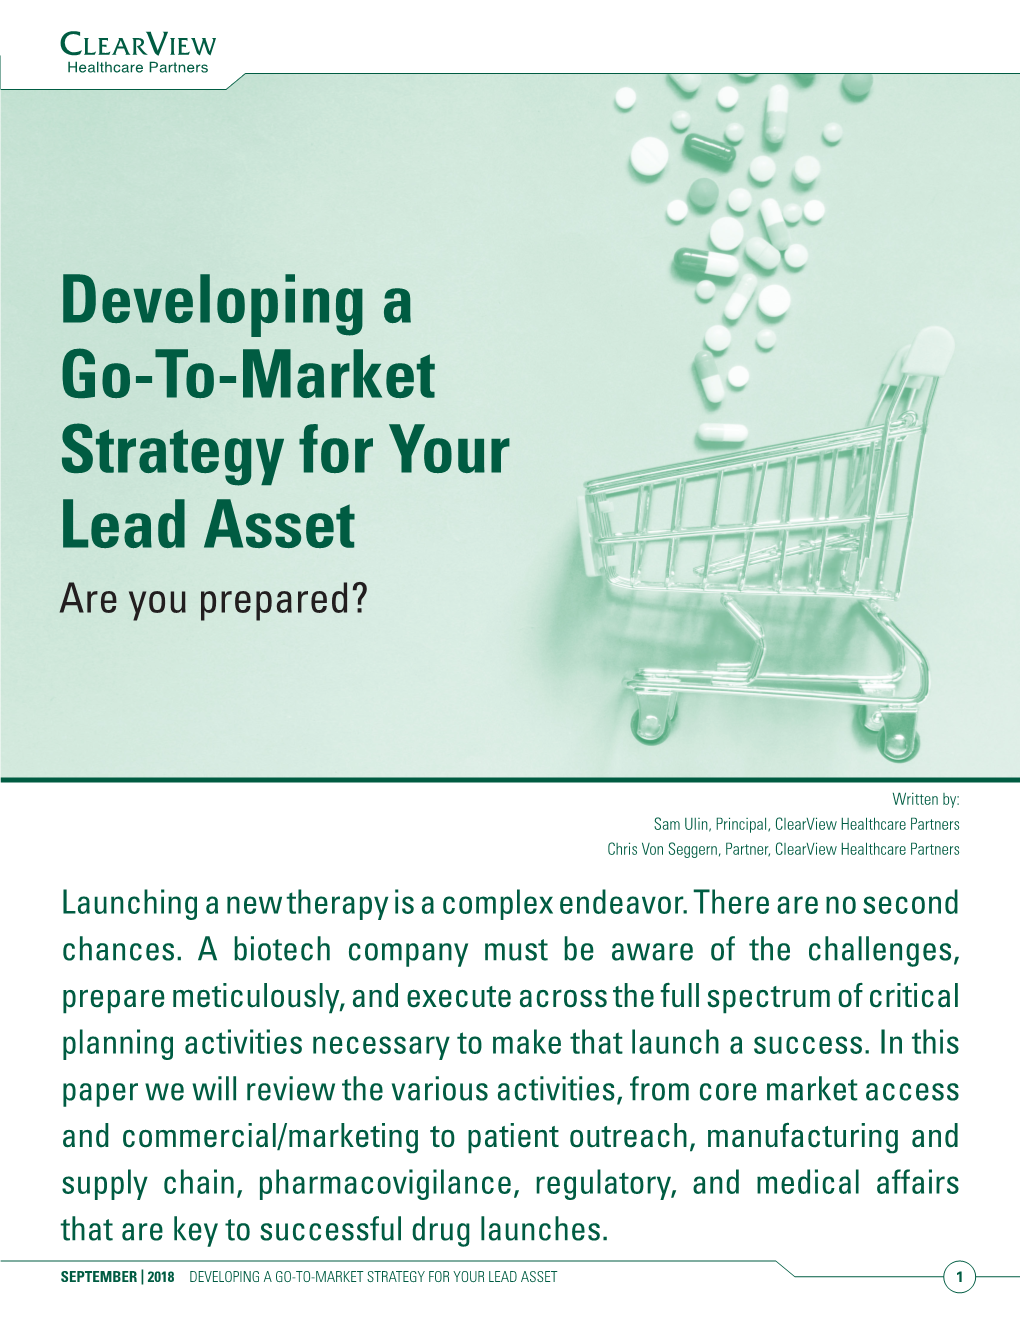 Developing a Go-To-Market Strategy for Your Lead Asset Are You Prepared?